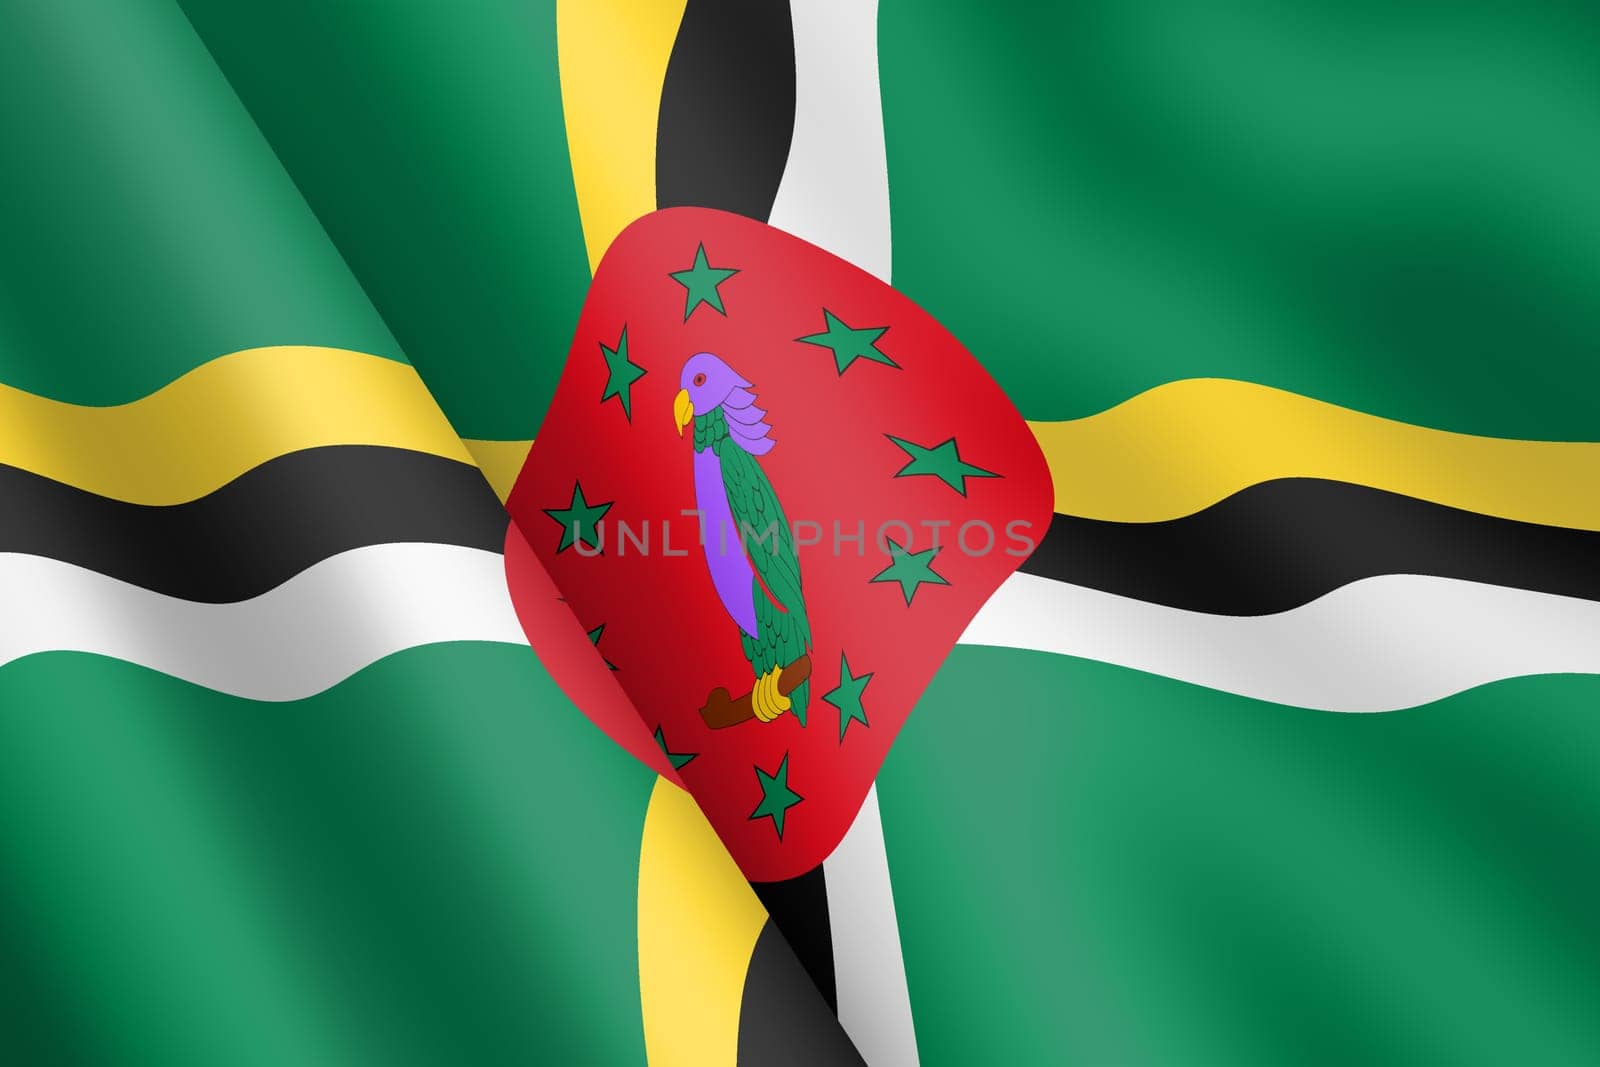 A Dominica waving flag 3d illustration wind ripple green yellow black red sisserou parrot